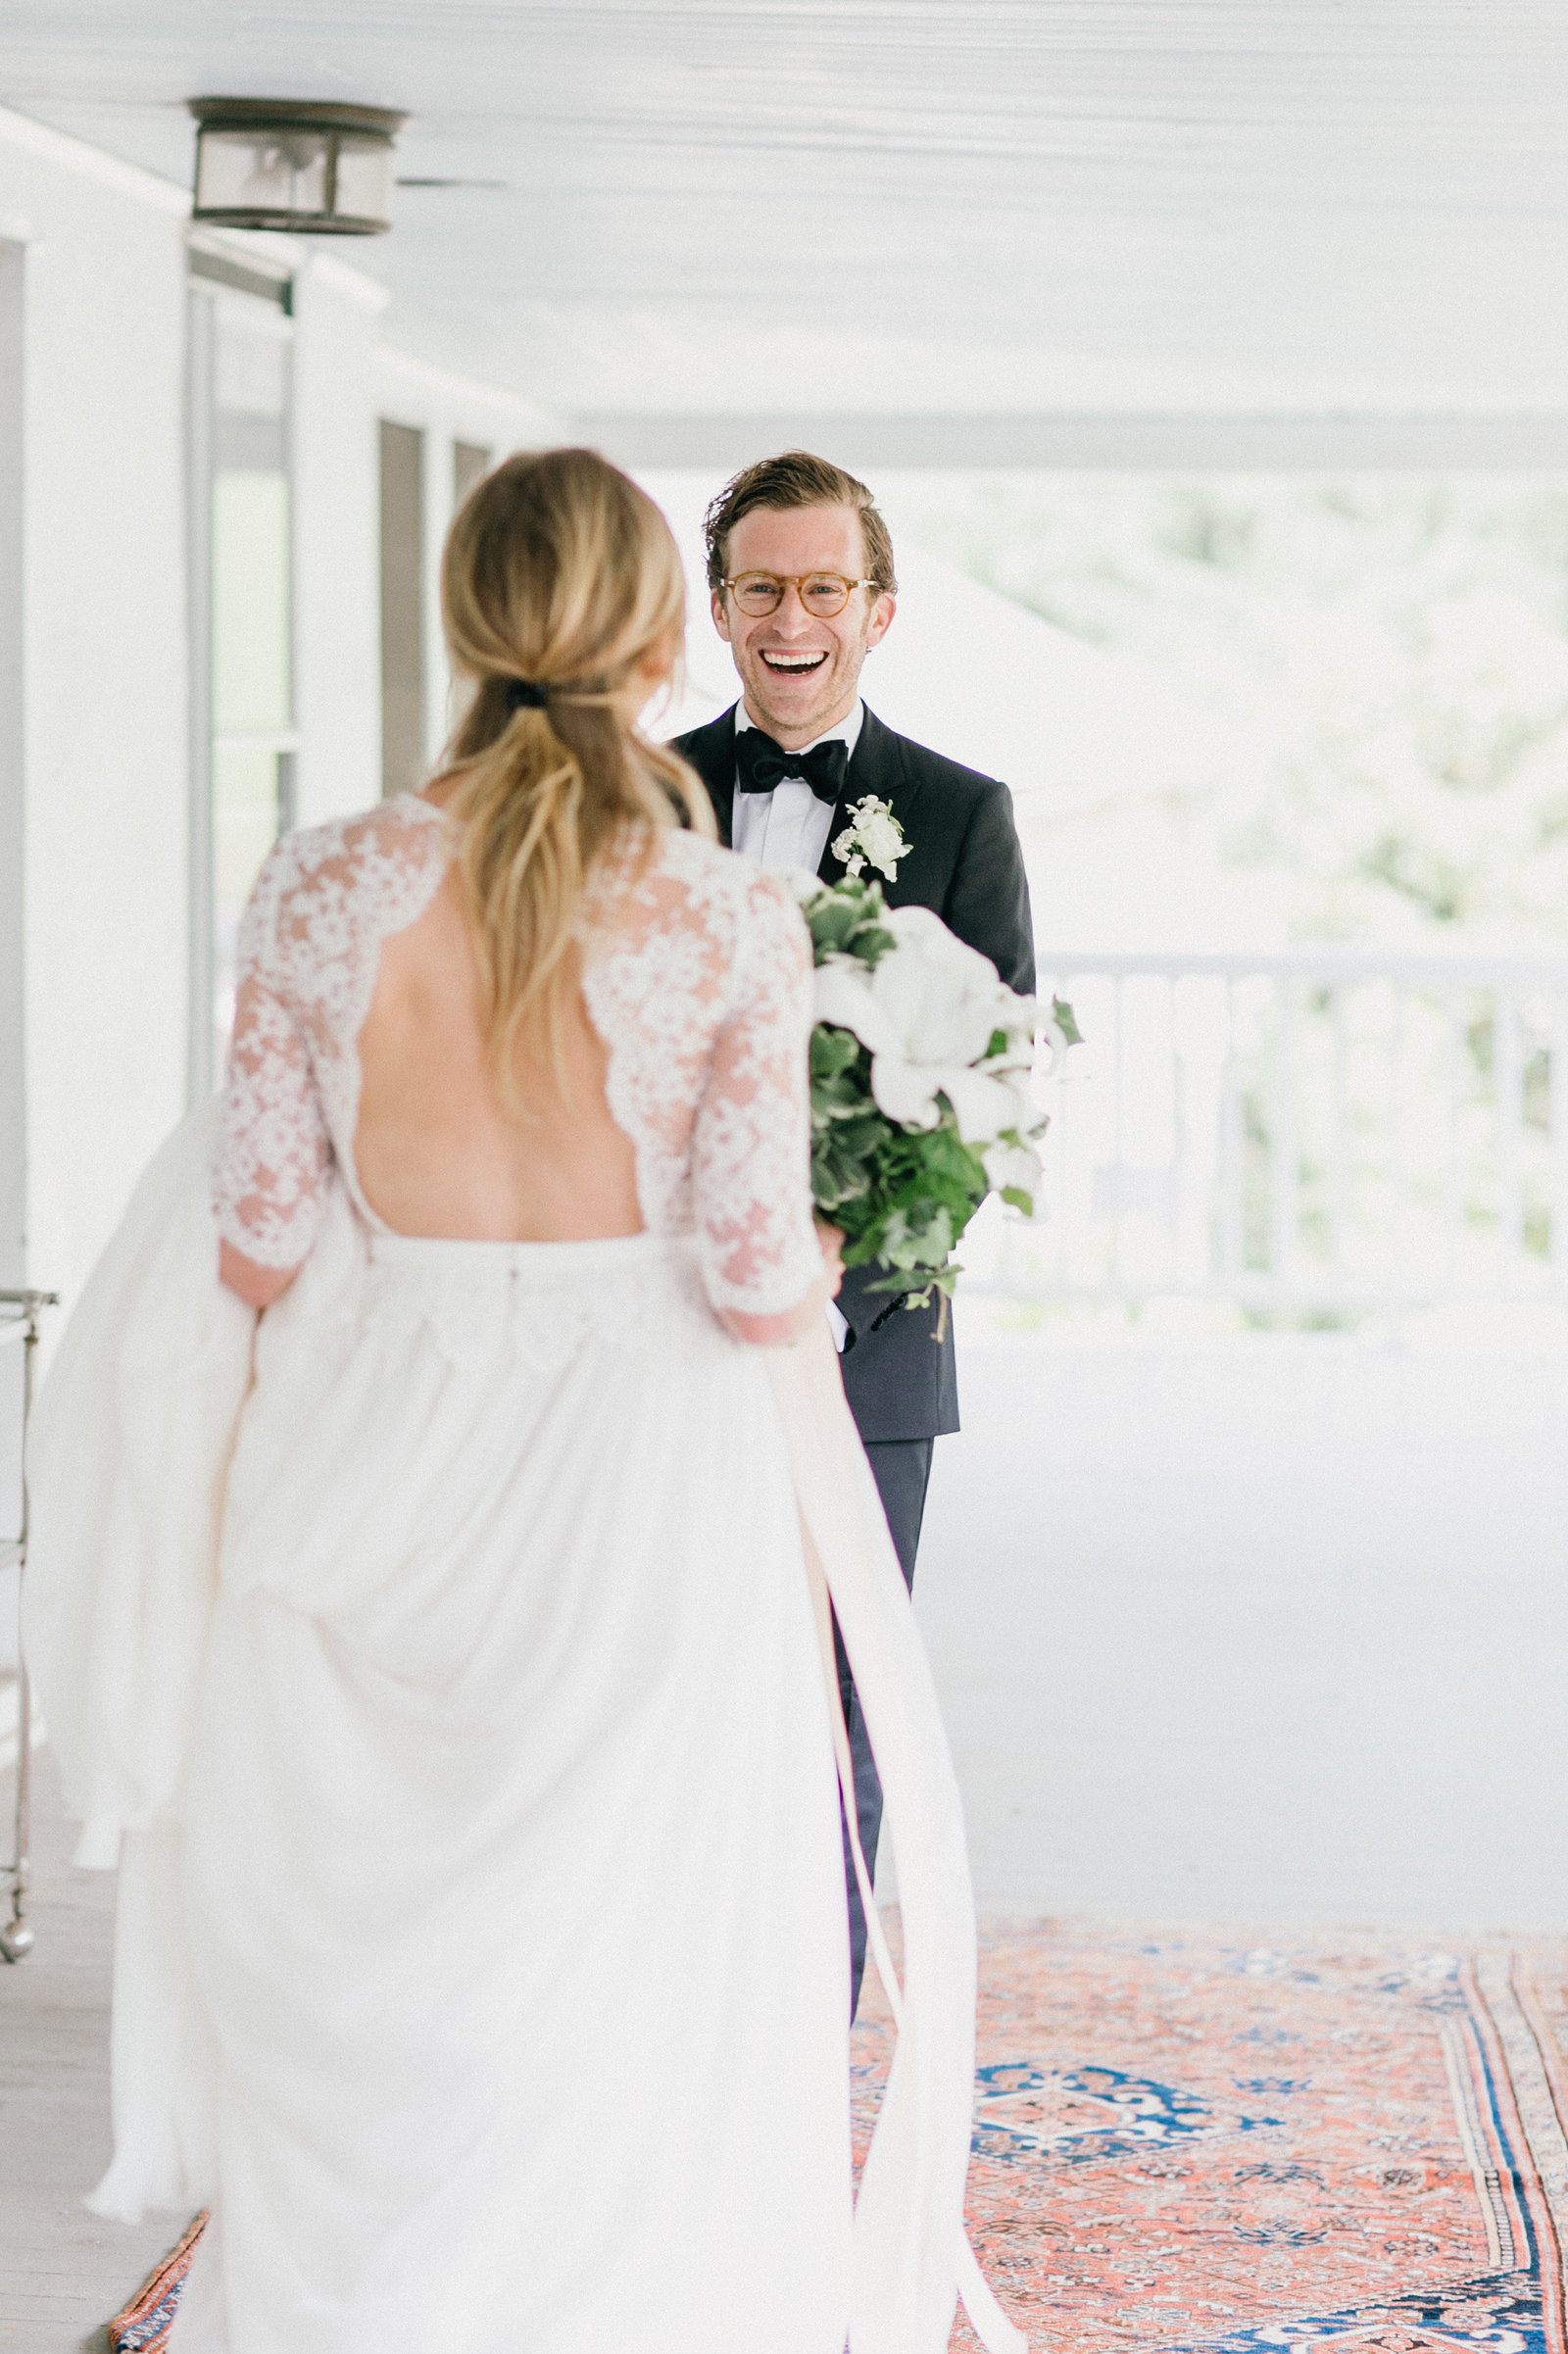 Groom seeing his bride in her dress for the first time!